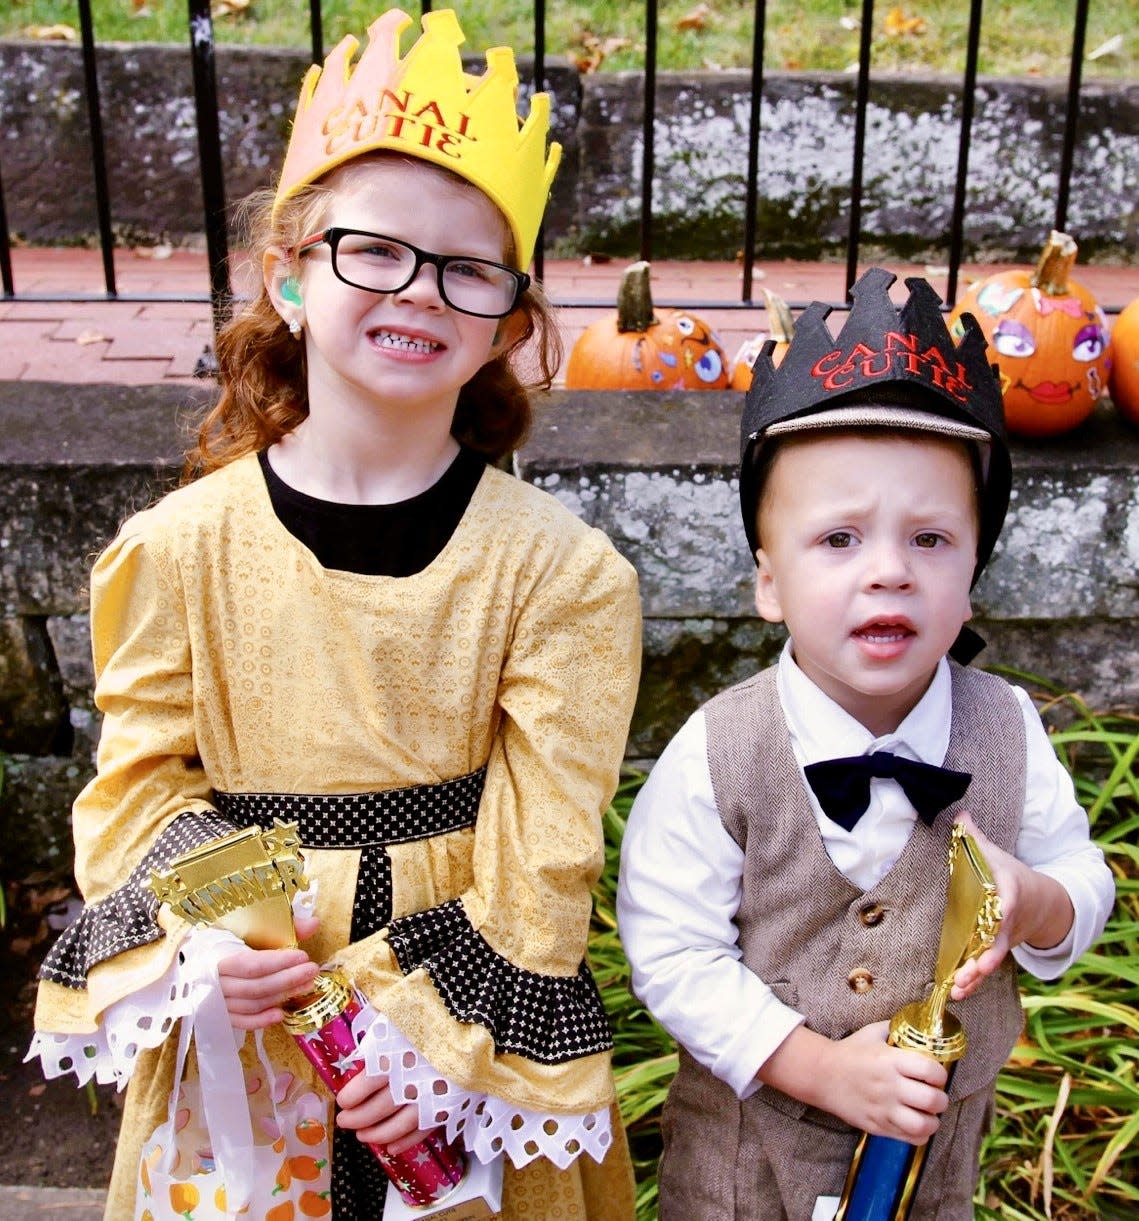 Rilynn Hall and Seth Ehman Carnes were named the Canal Cuties during the annual Coshocton Canal Court royalty contest held during the recent Apple Butter Stirrin' Festival. The event organized by Amanda Fink benefits the Coshocton Canal Court Committee. Photos are posted on the canal royalty Facebook page and each 10 likes gets the child one ticket into the drawing for Canal Cuties.